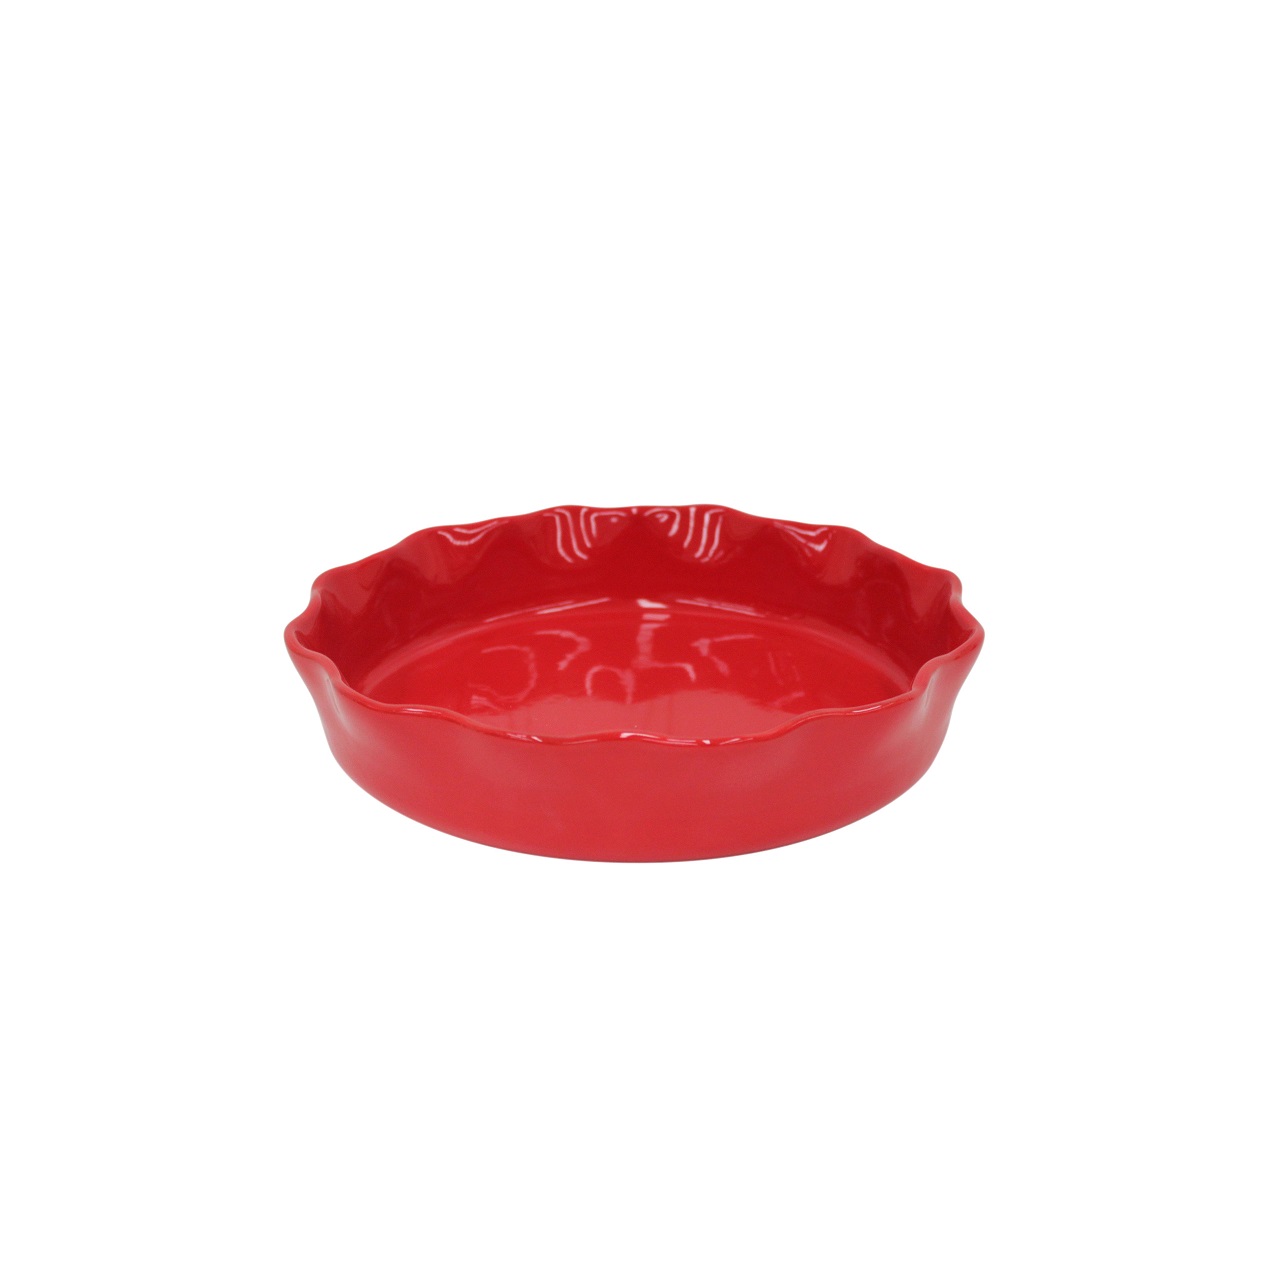 Cook & Host Red Pie Dish 27cm Gift